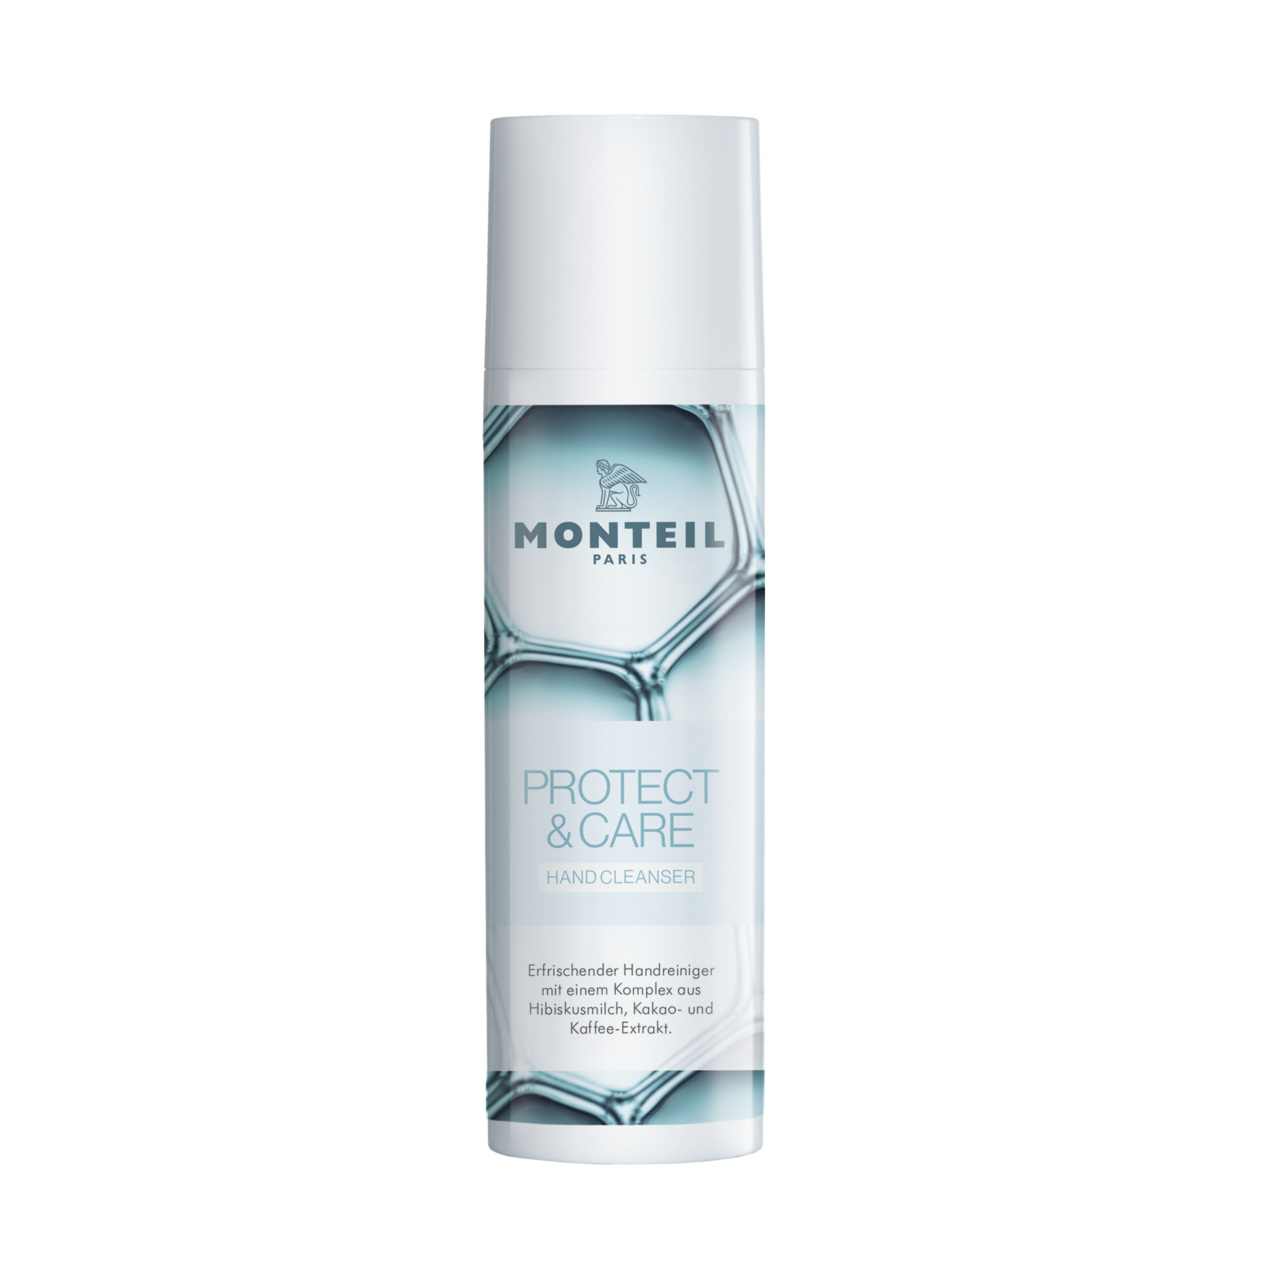 Protect & Care Hand Cleanser